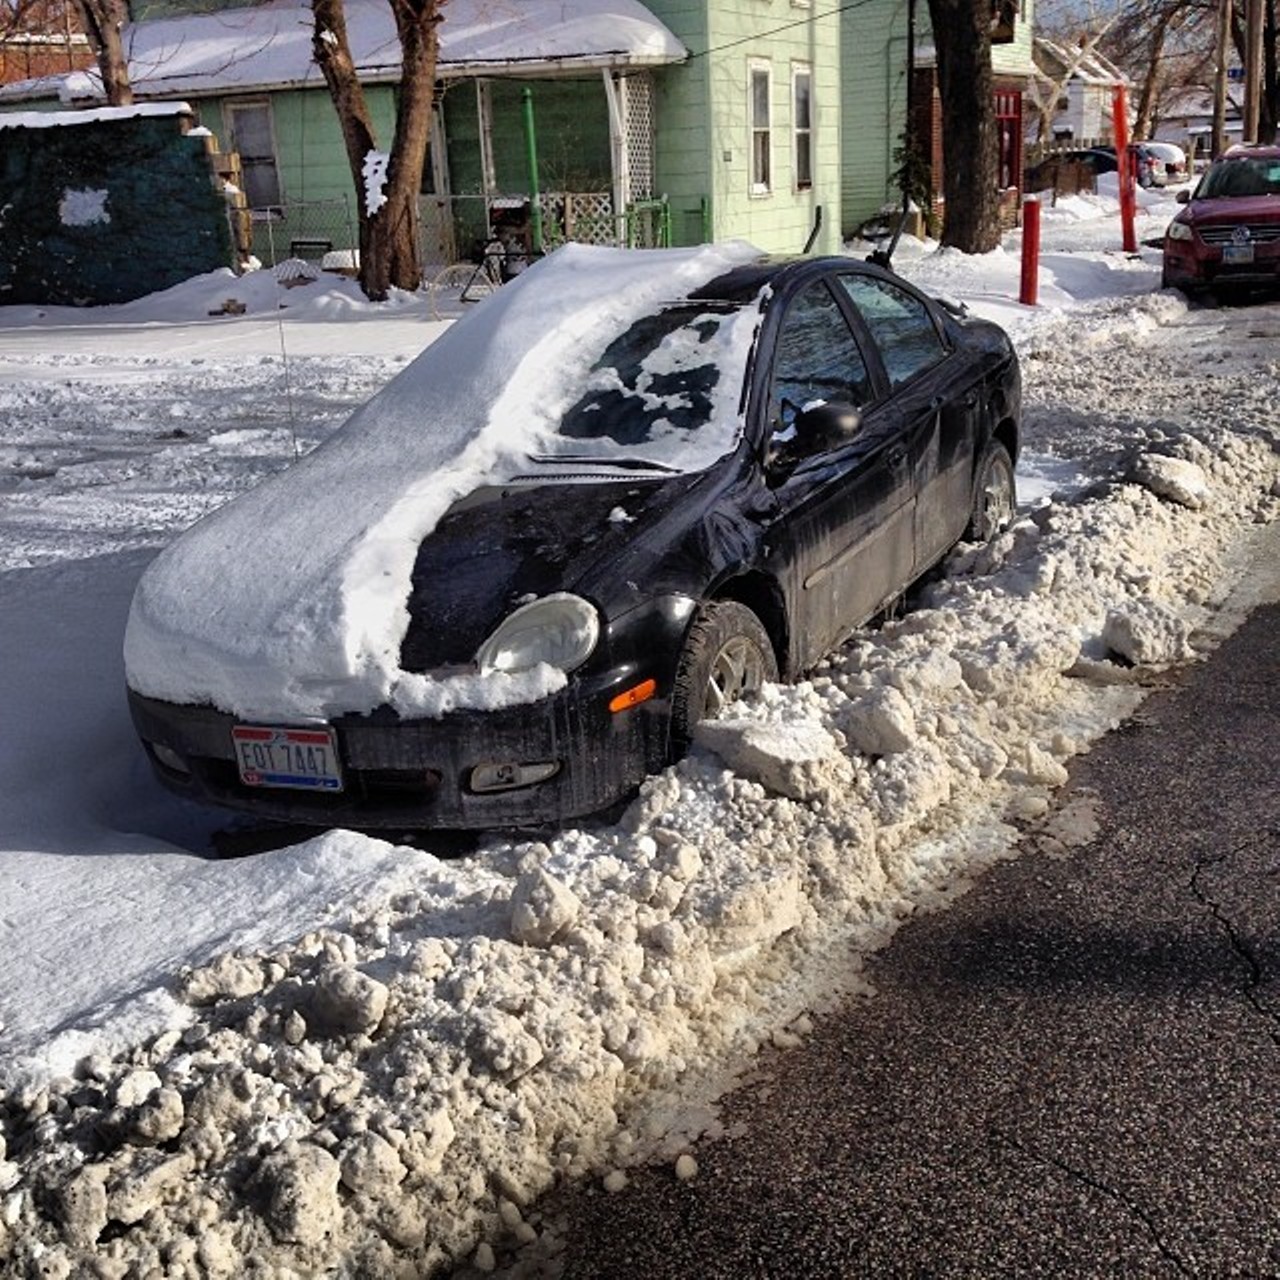 By digging out half of your car, then giving up and going back to bed.